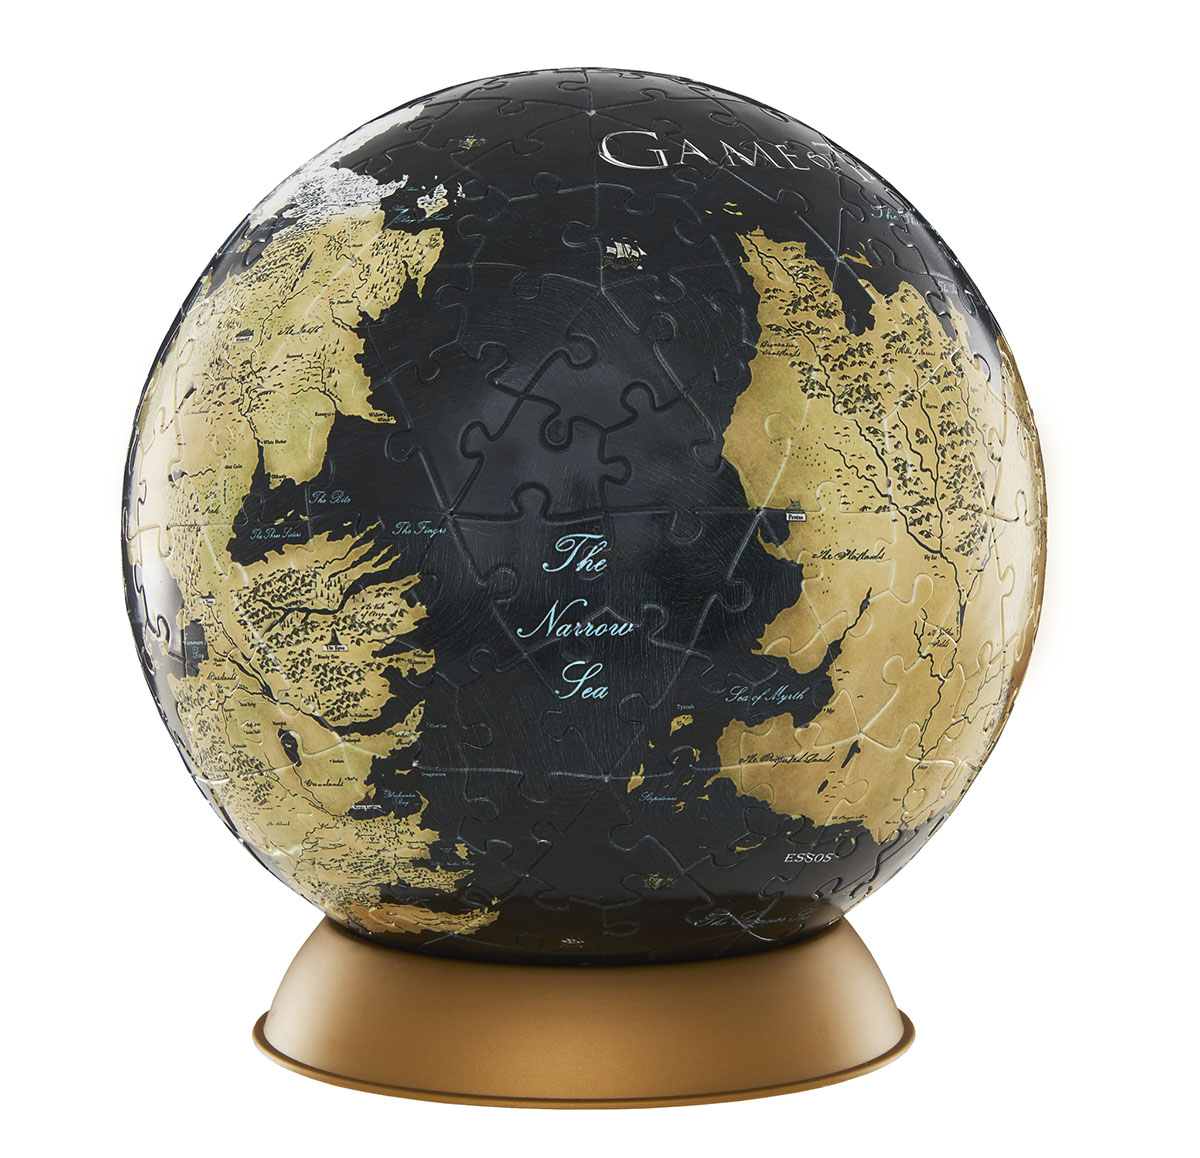 Game of Thrones Globe : 6 inch Game of Thrones Puzzleball